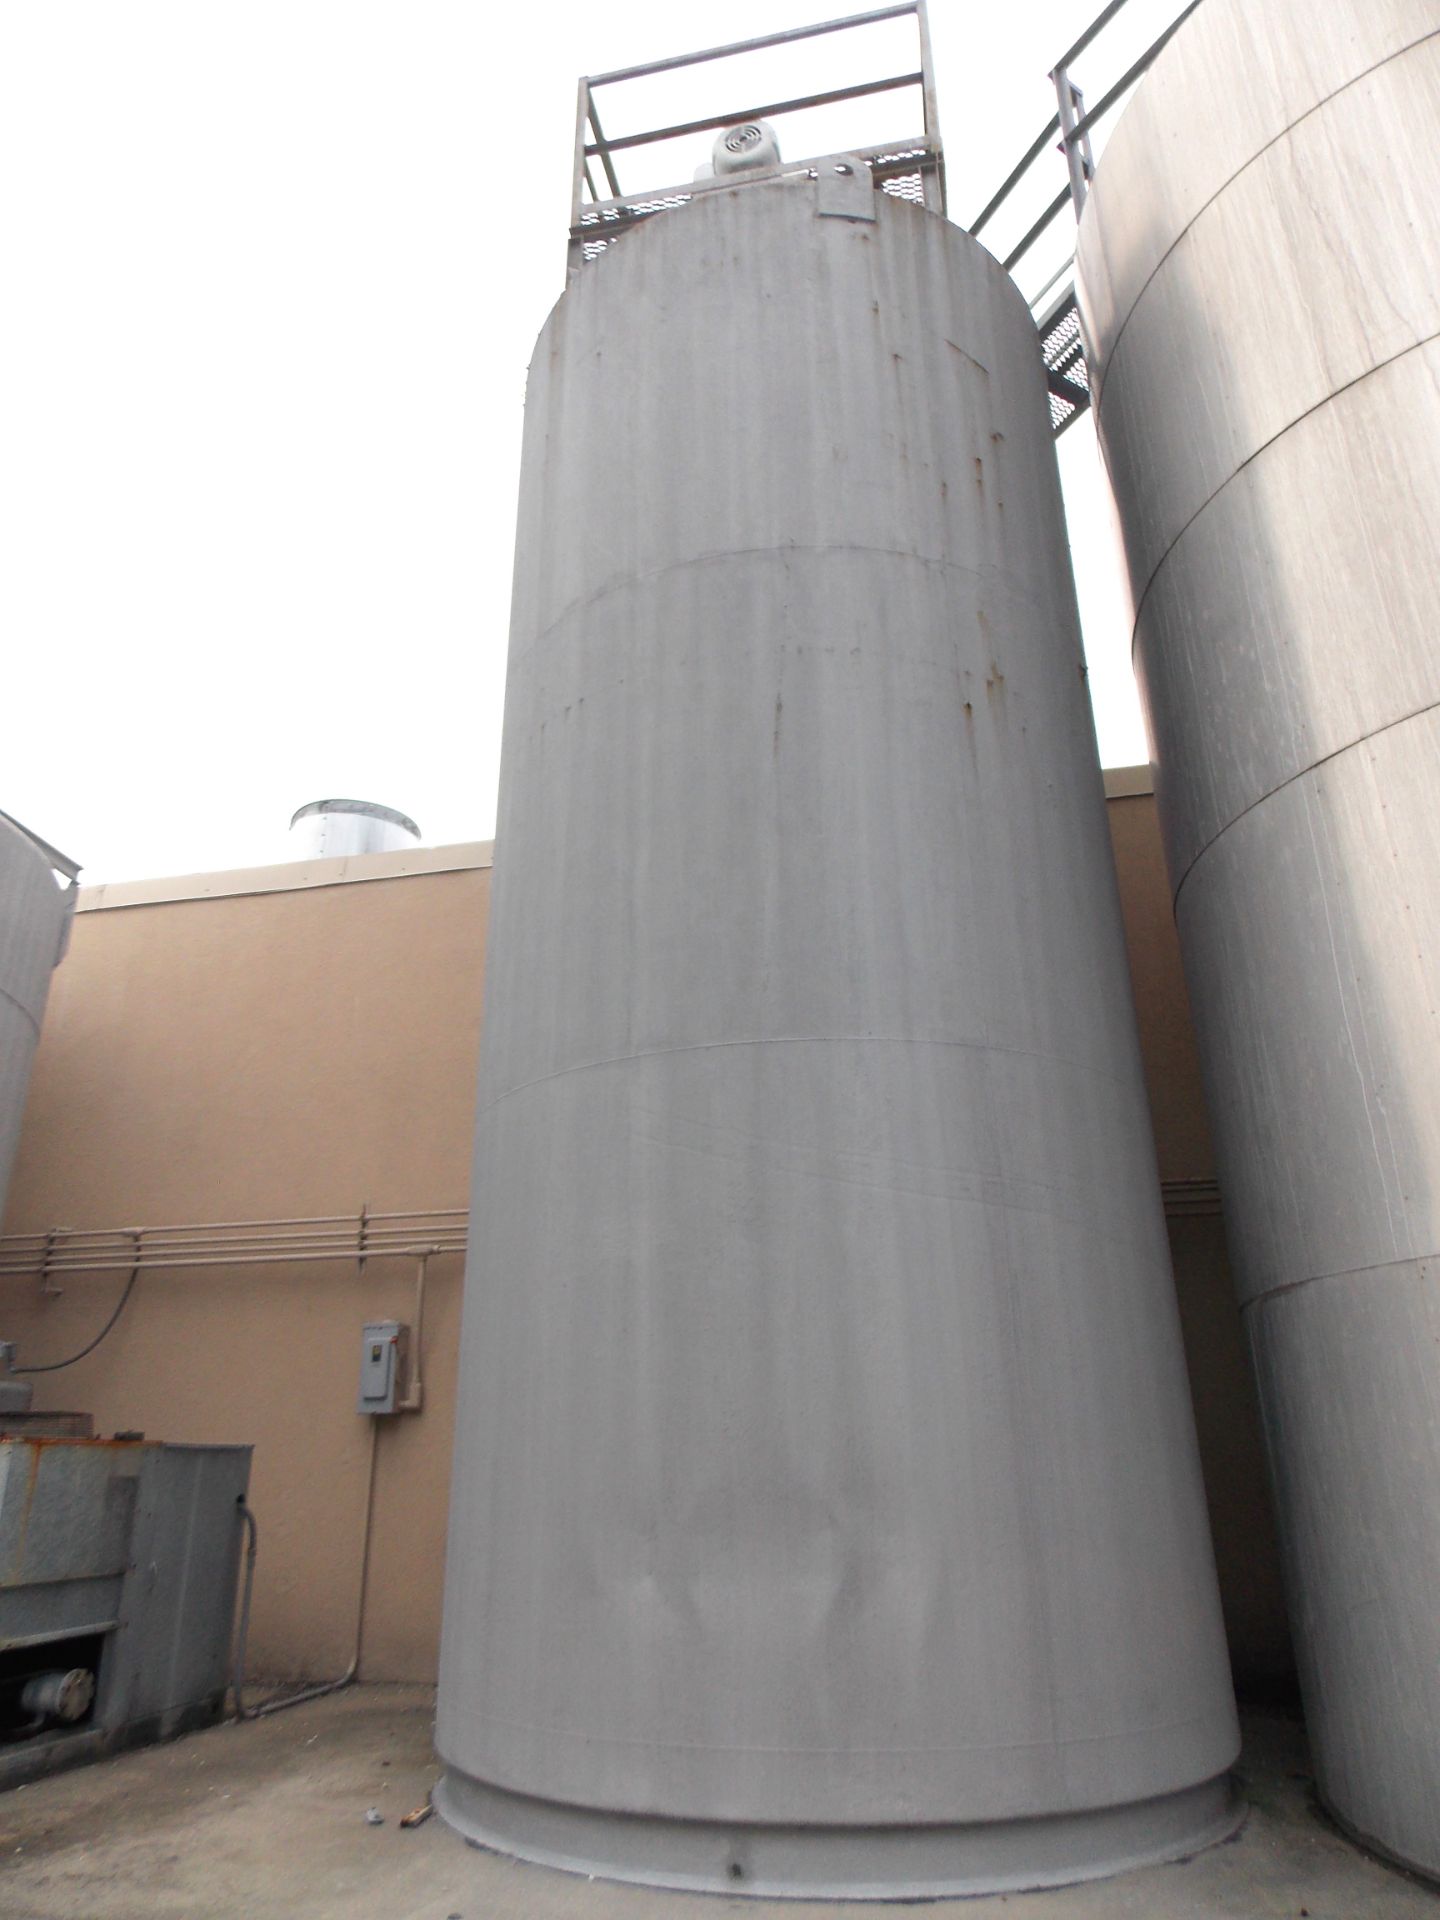 Dairy Craft 6,000 Gallon Stainless Vertical Silo with Agitator Serial: 77J3387Stainless Steel